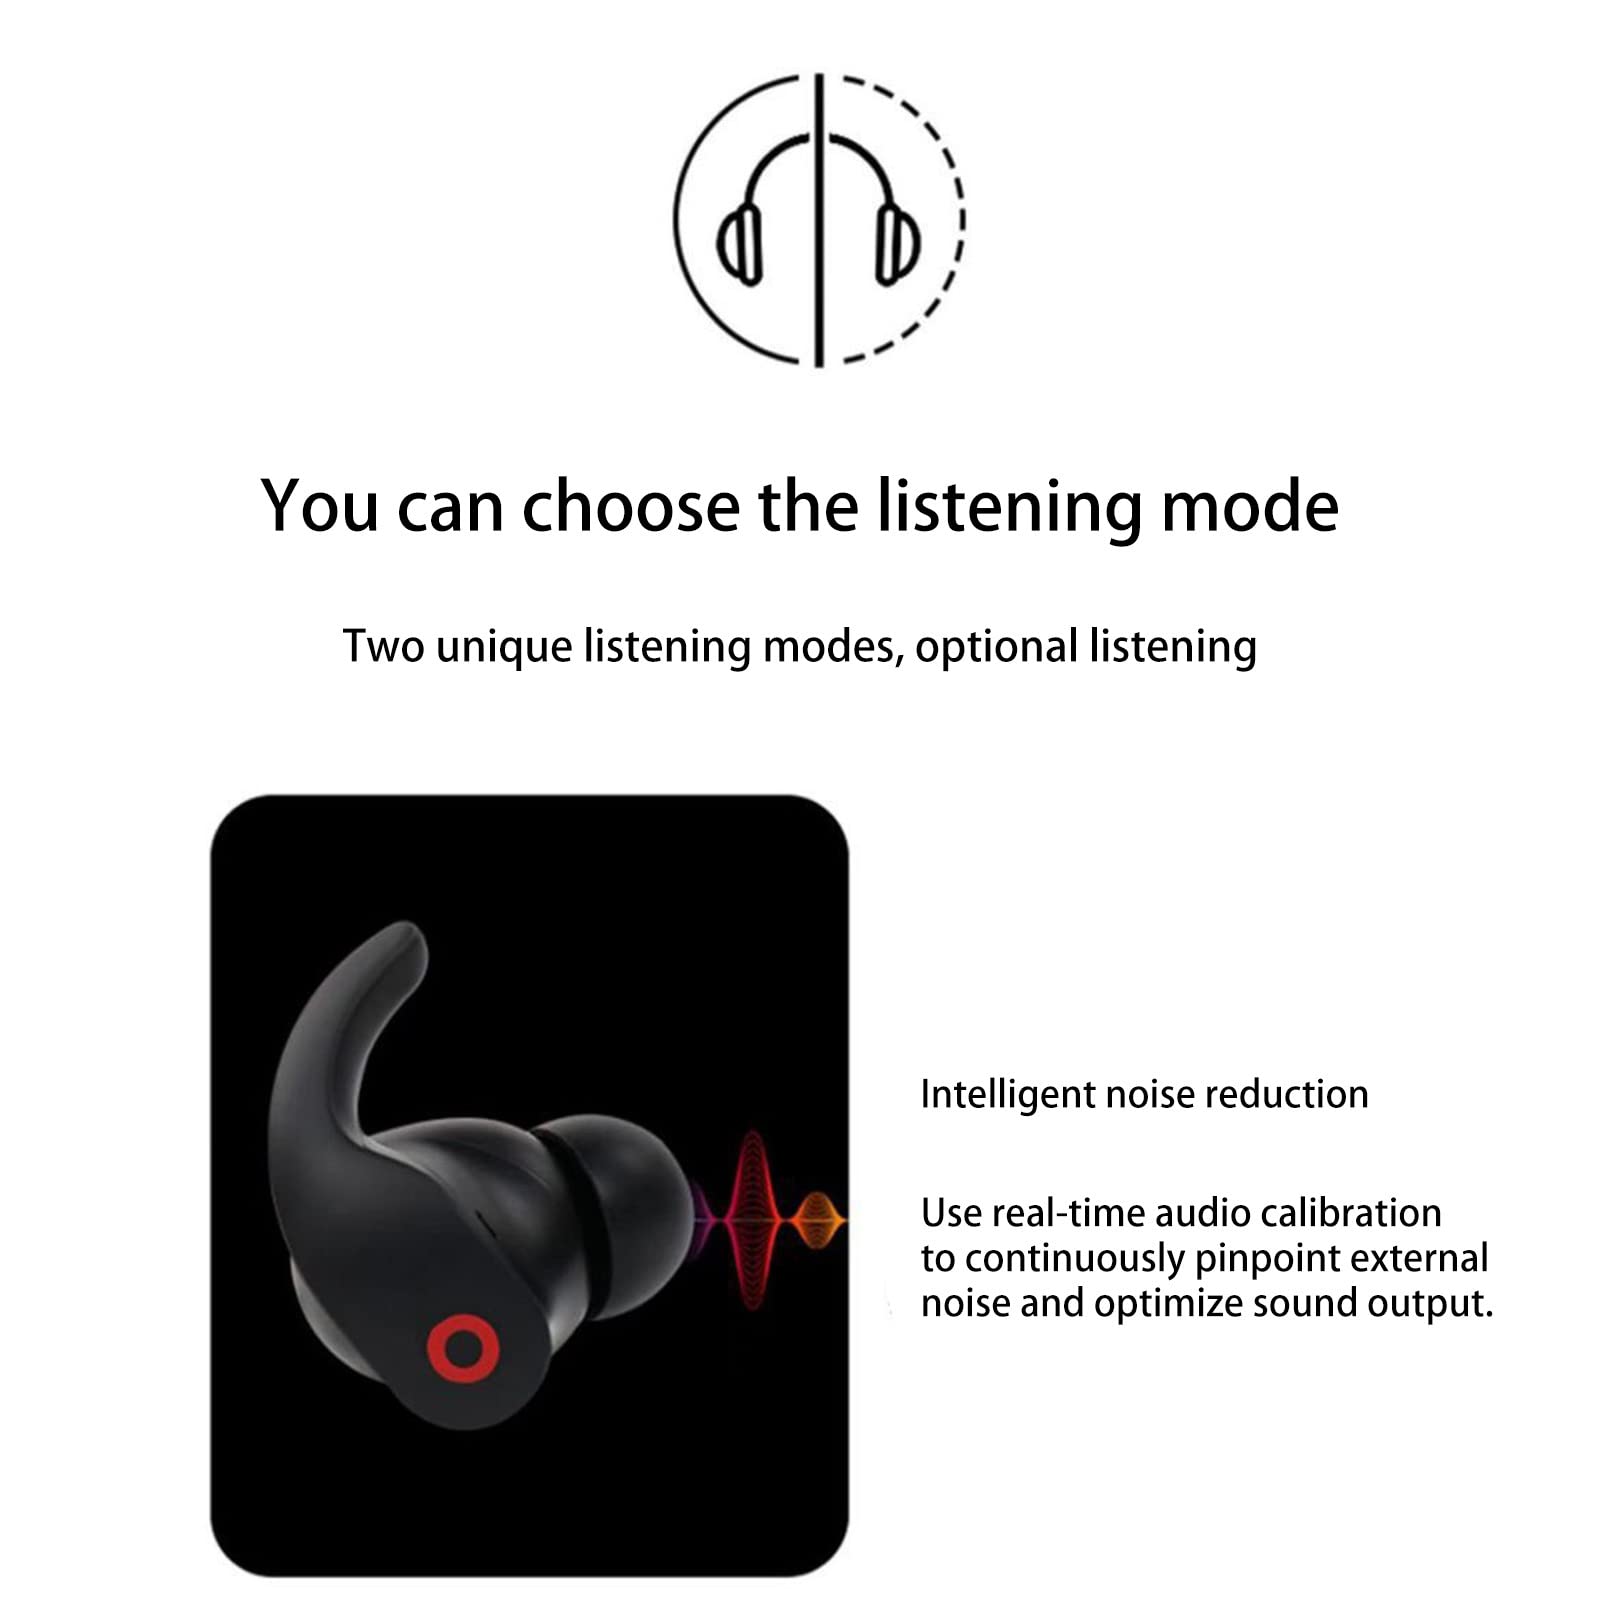 Viadha True Wireless Bluetooth 5.2 Headphones Noise Cancelling Earbuds, in-Ear HiFi Stero Earphones Built-in Mic for iOS & Android, IPX 7 Waterproof, Suitable for Daily Sport Workout Use